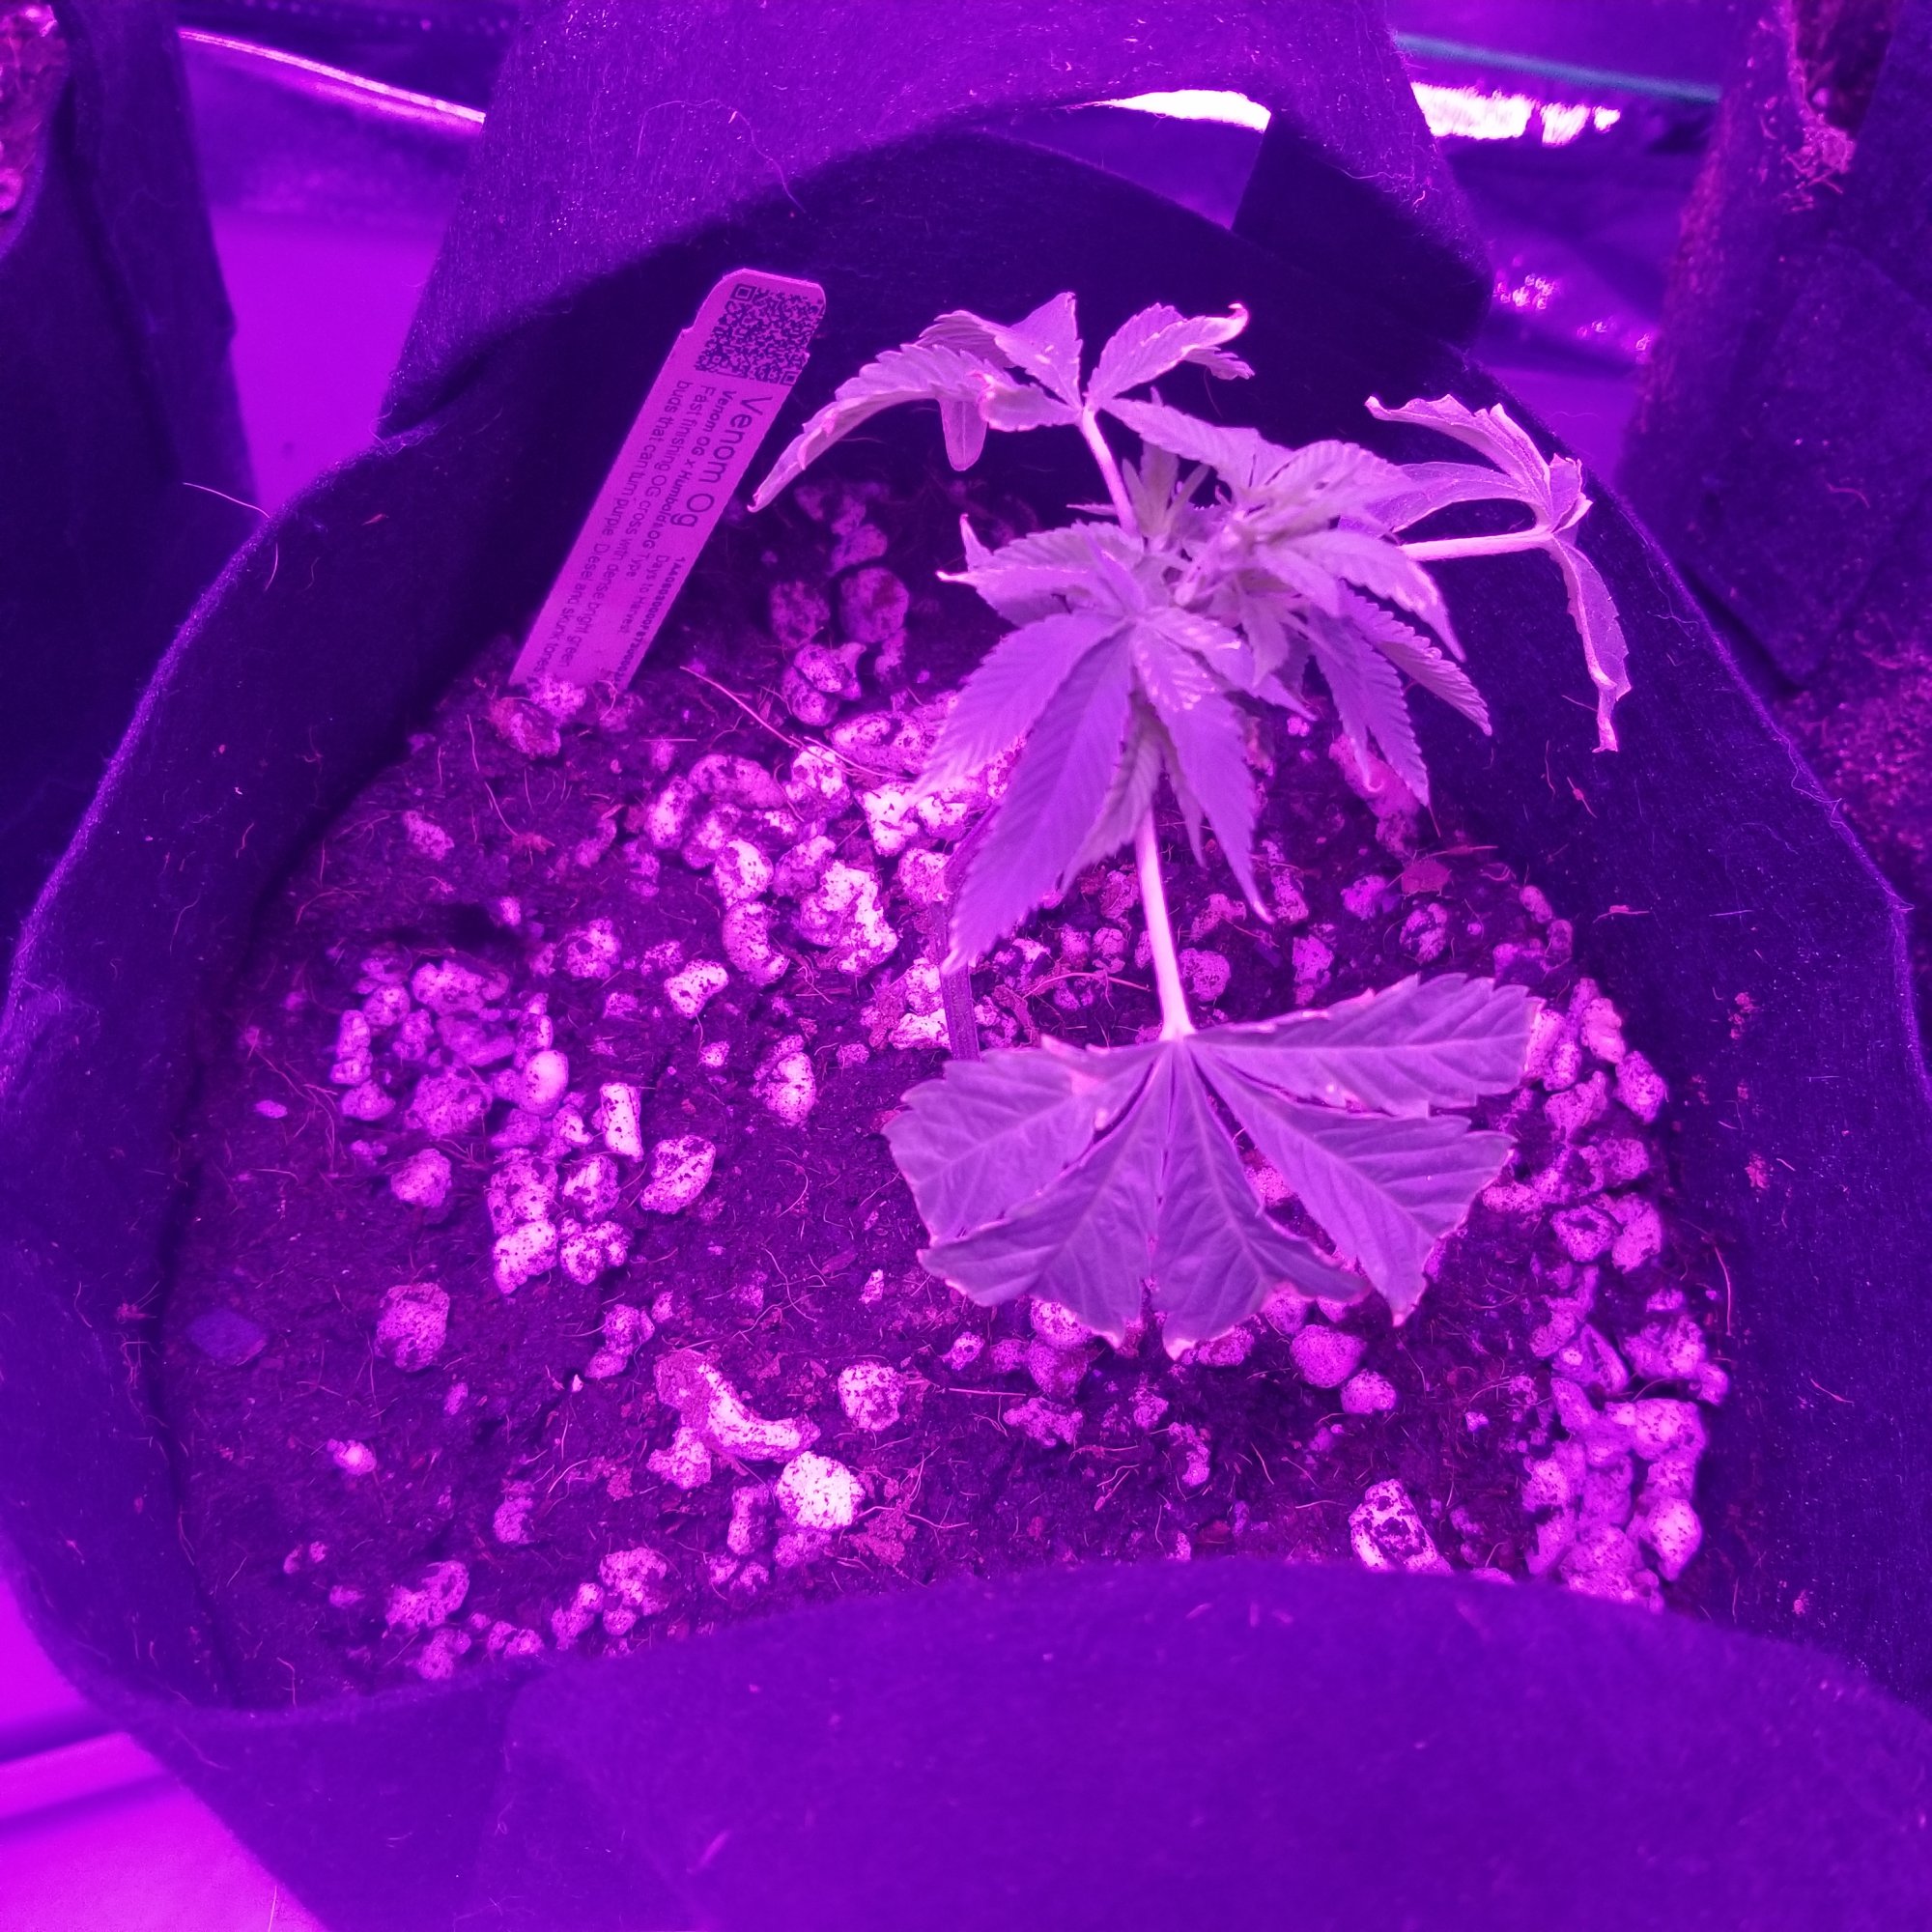 Are my clones dying please help 10